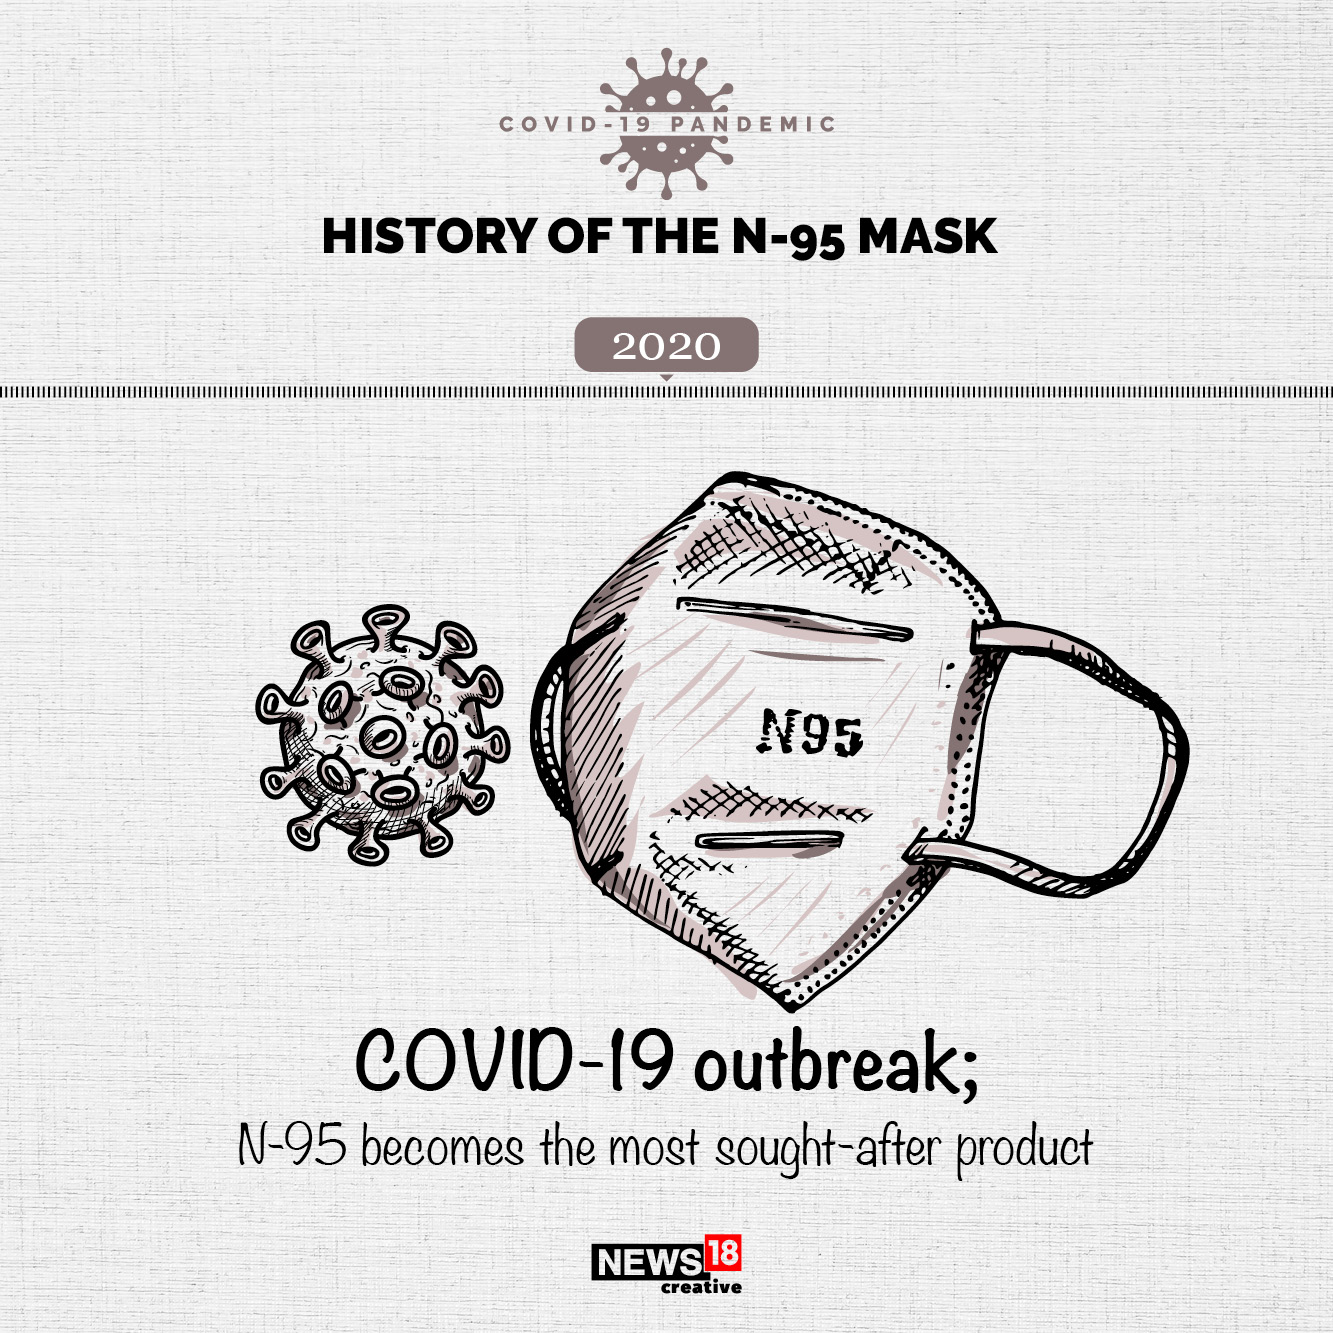 The history of the N-95 mask